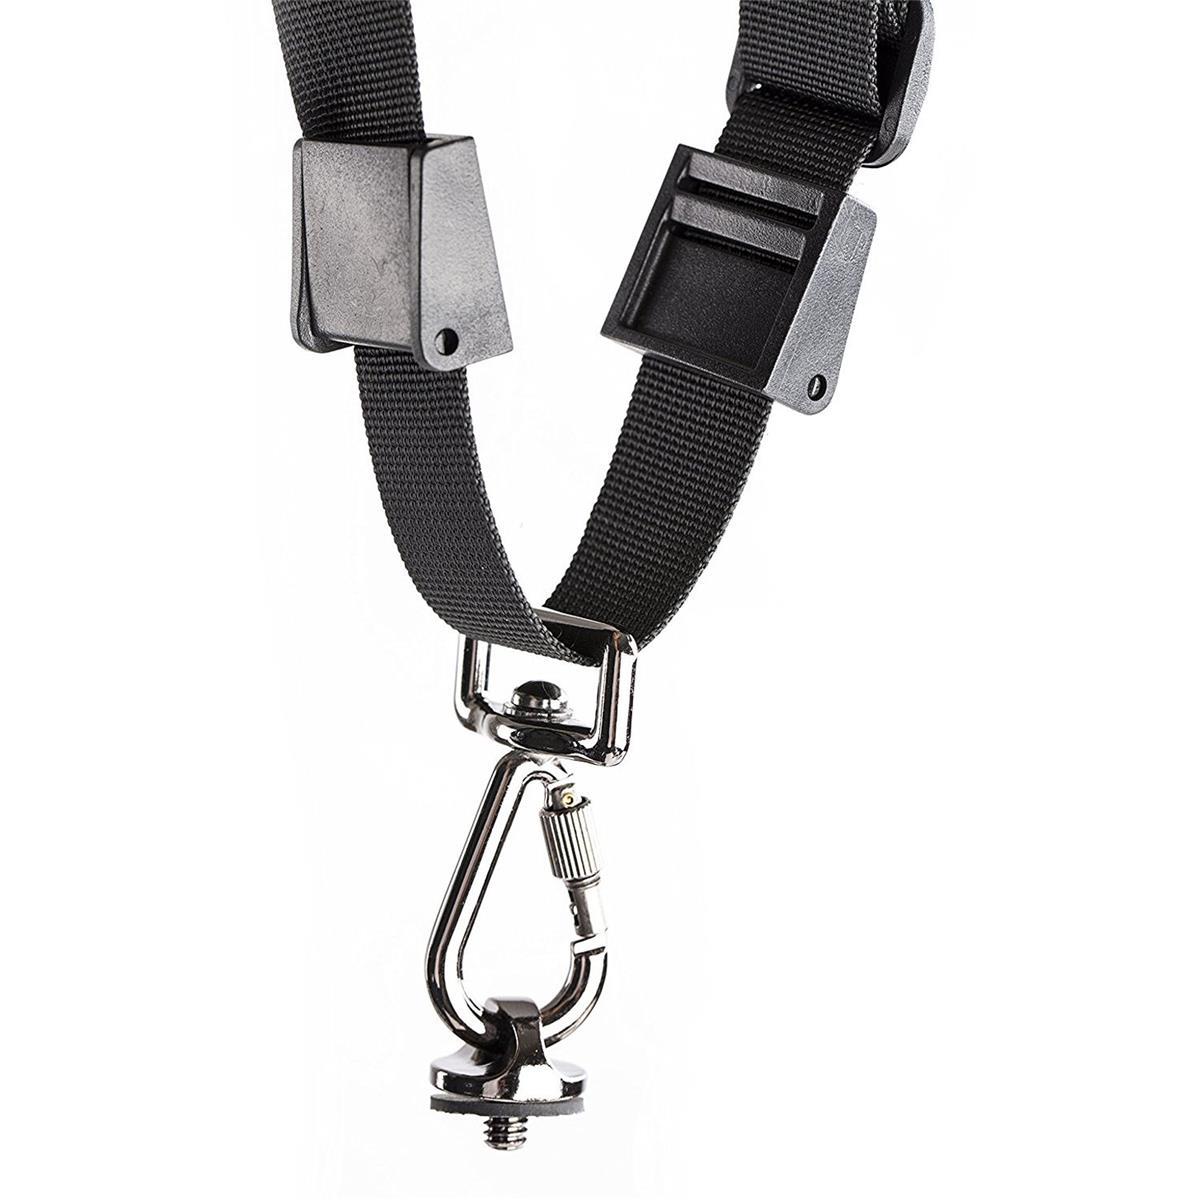 Movo Photo MP-SS4 Rapid Camera Sling Strap for $7.95 Shipped